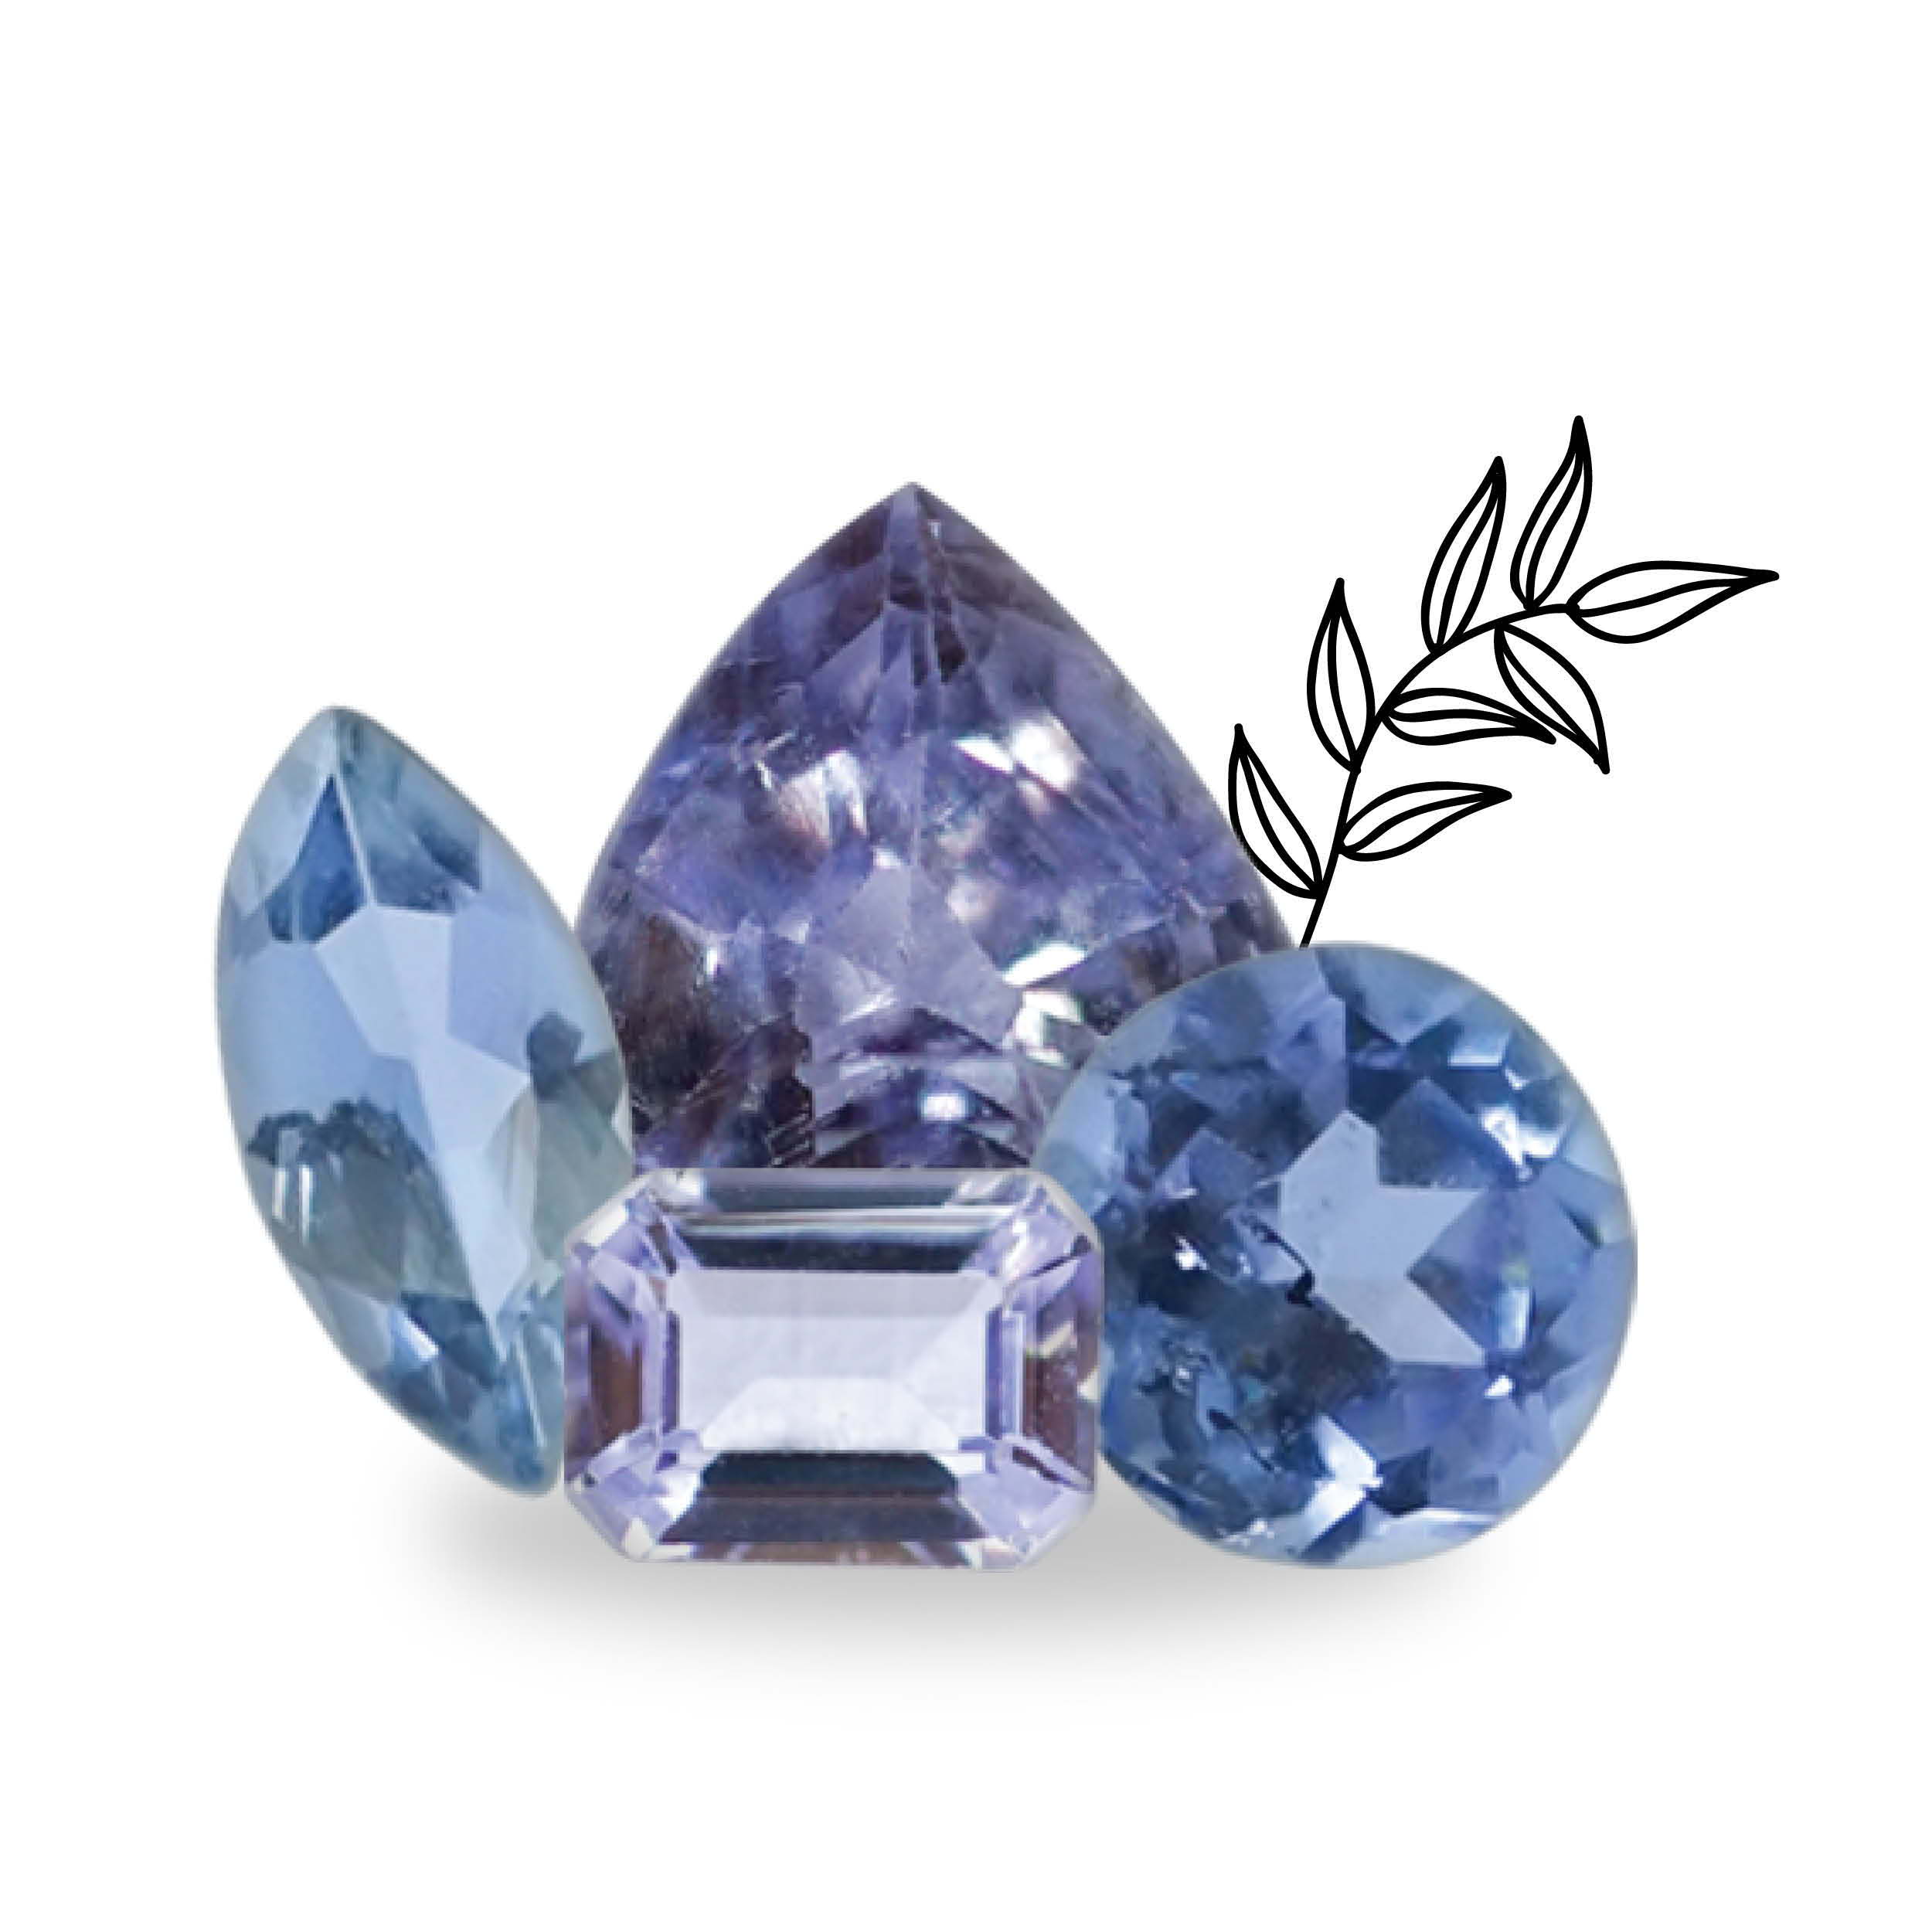 Raw and polished tanzanite from the tanzanite jewelry collection